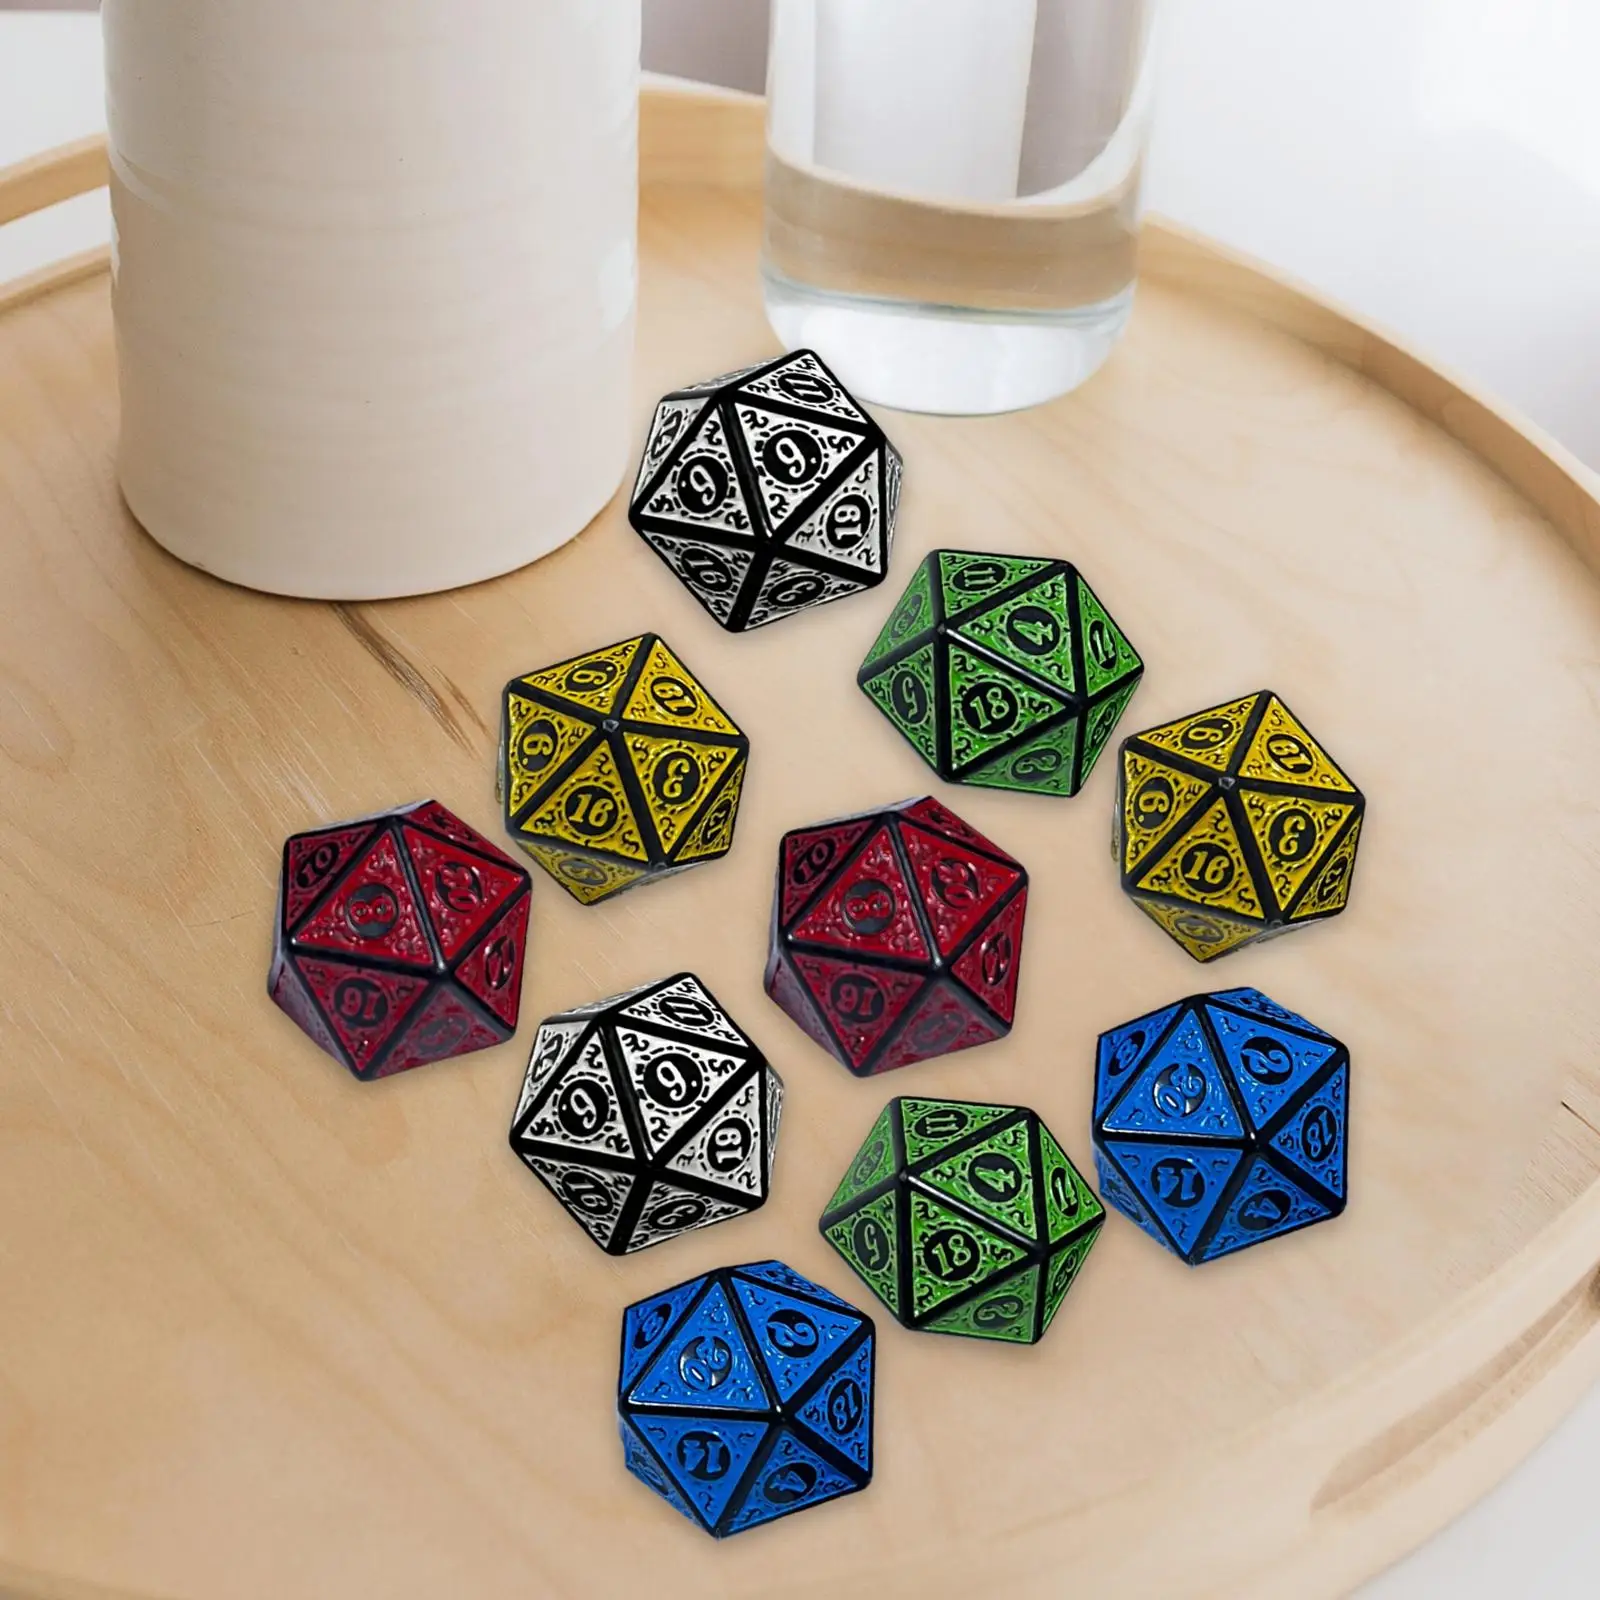 10 Pieces Astrology Dice Polyhedral Dice Entertainment Toy Crafts Constellation Dices 20 Sided for Party Toy Teaching Math